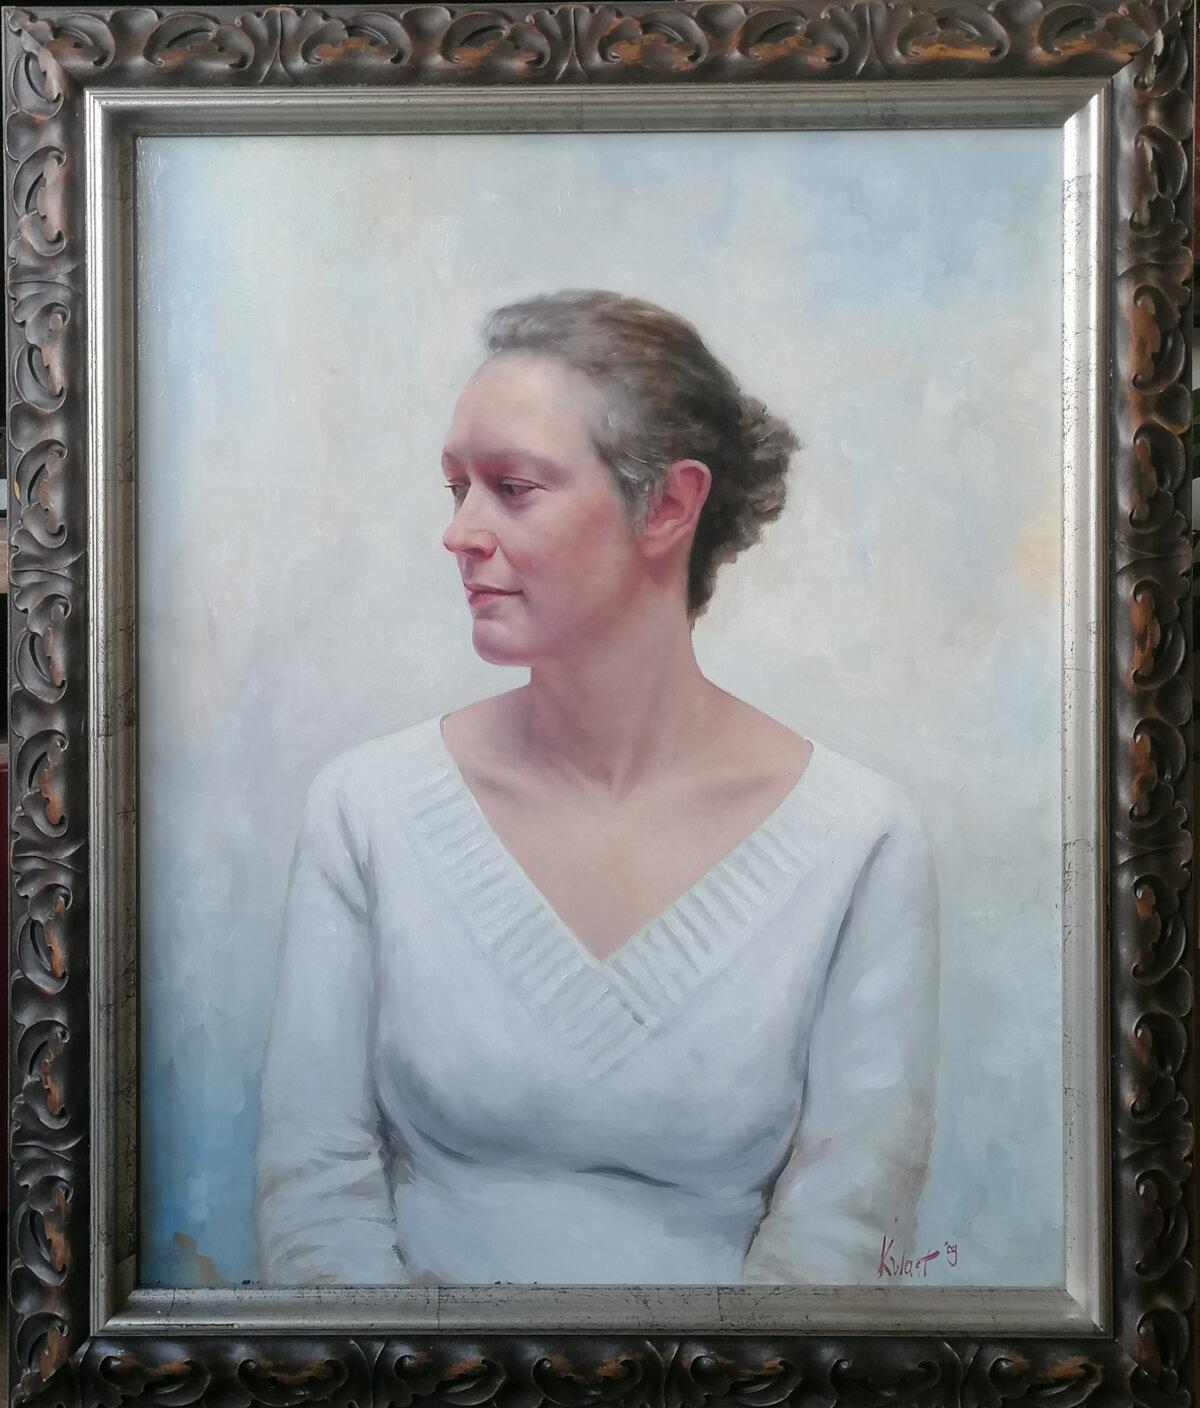 This year, Nard Kwast won an honorable mention award for his 2009 portrait “Paulien,” at the Sixth NTD International Figure Painting Competition. Oil on panel; 27 1/2 inches by 19 3/4 inches. (Courtesy of Nard Kwast)